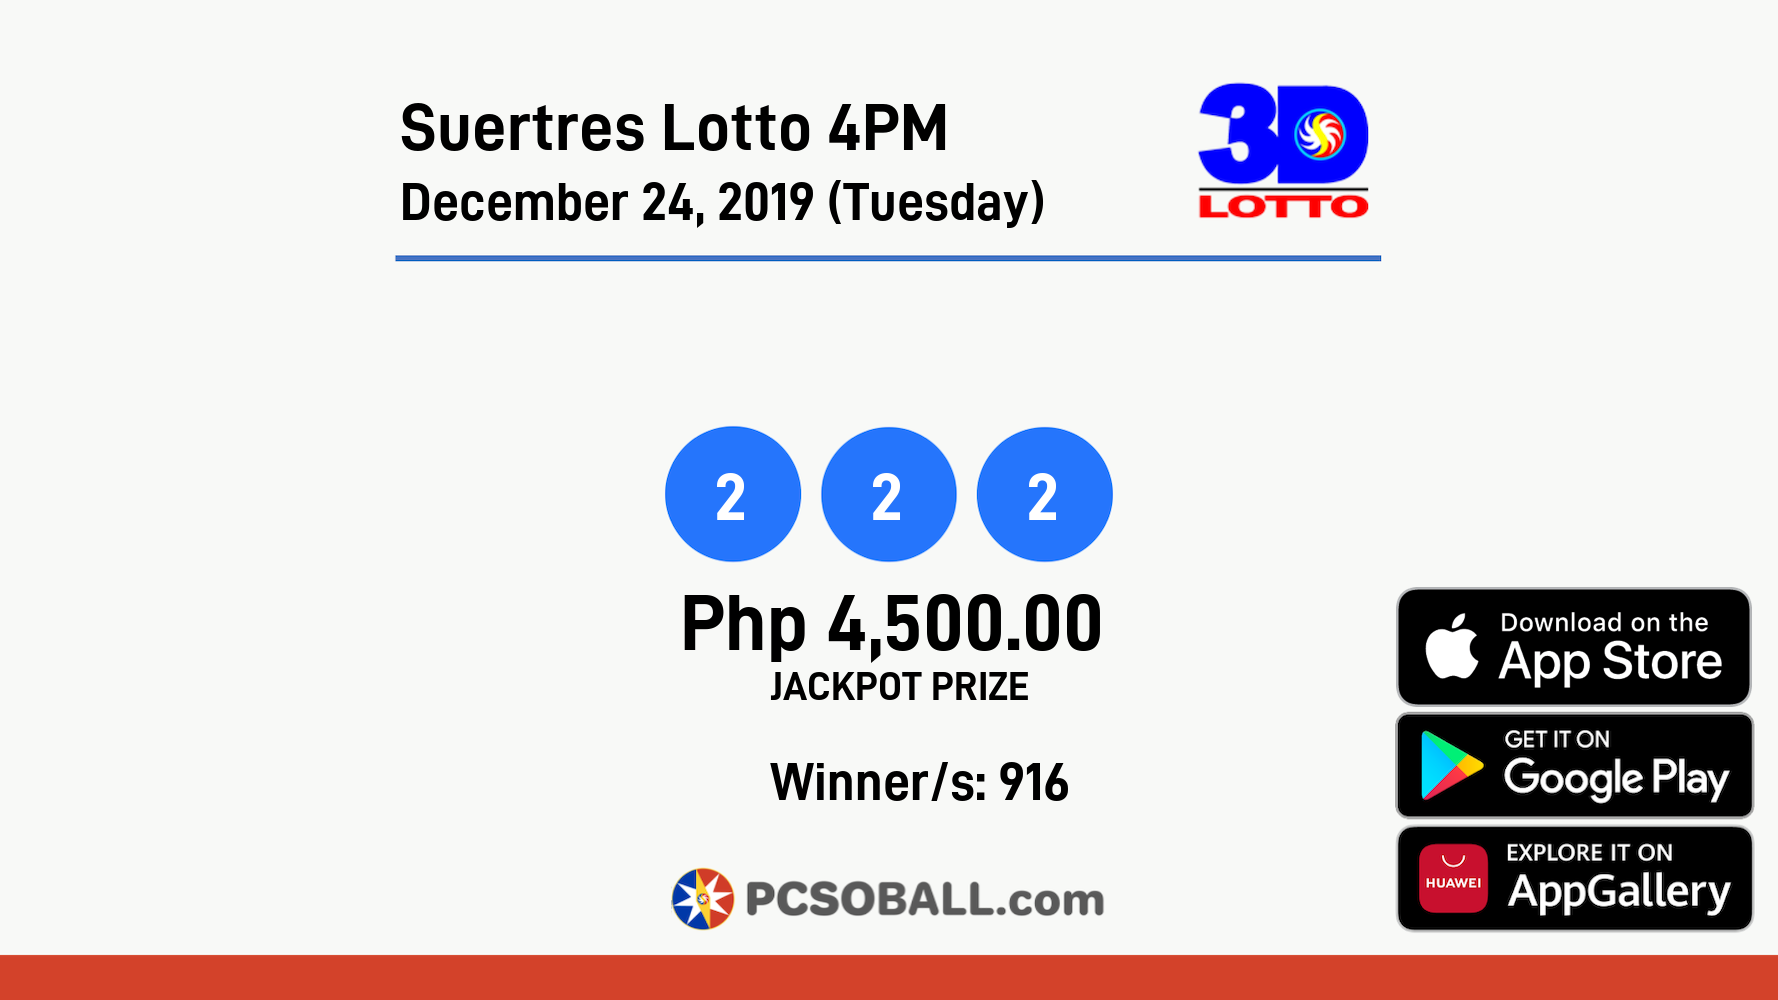 Suertres Lotto 4PM December 24, 2019 (Tuesday) Result